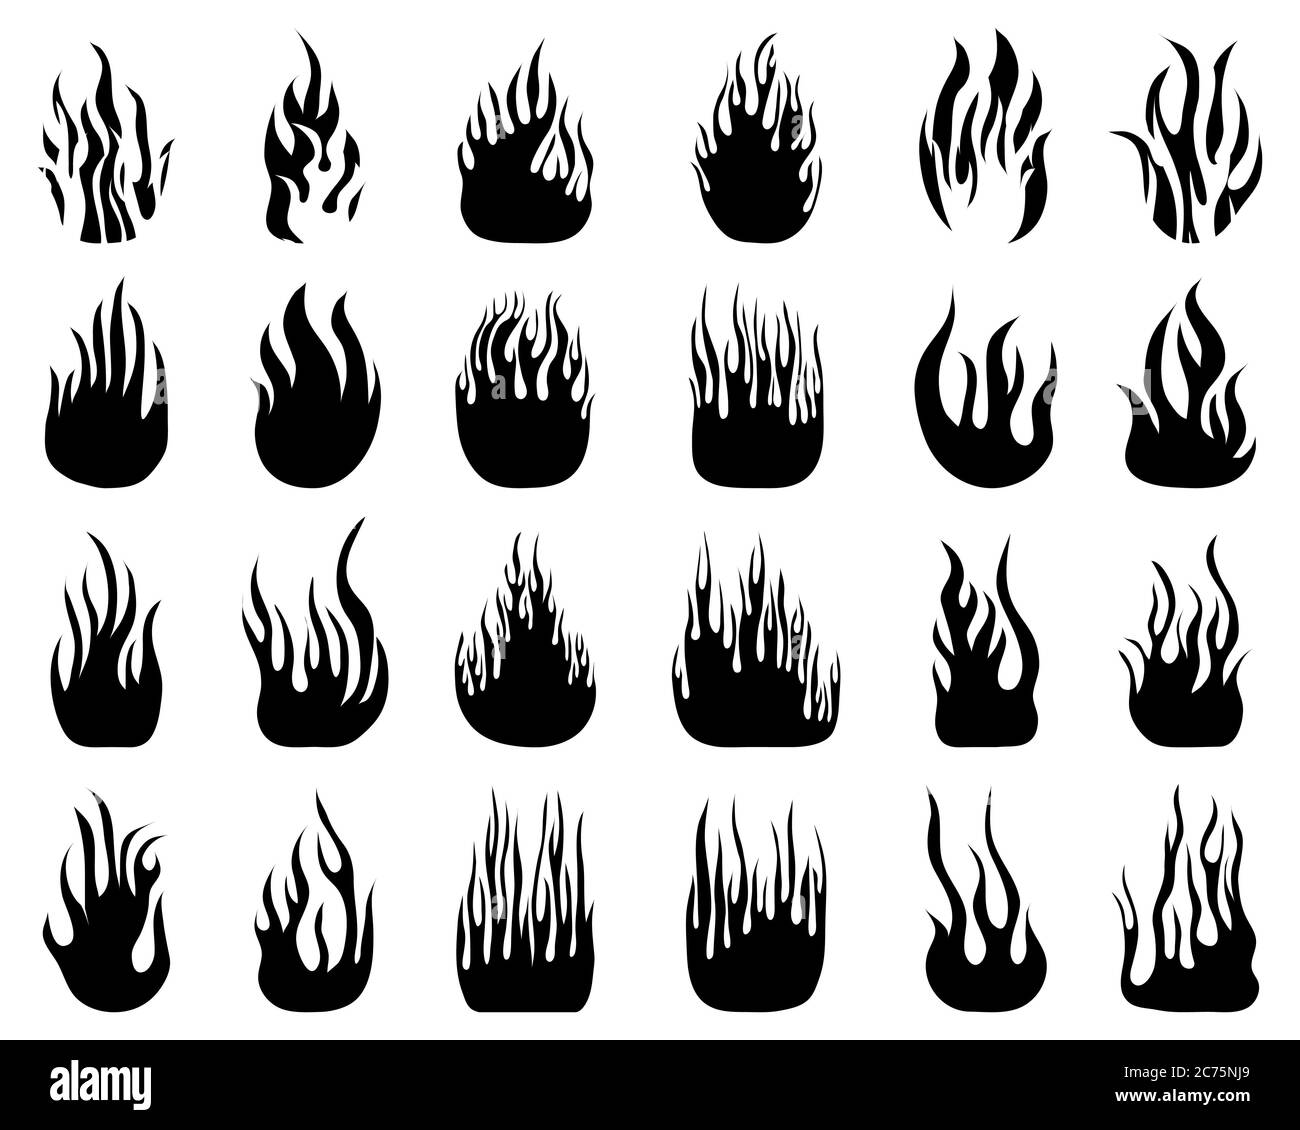 Black silhouettes of fire flames on a white background Stock Photo